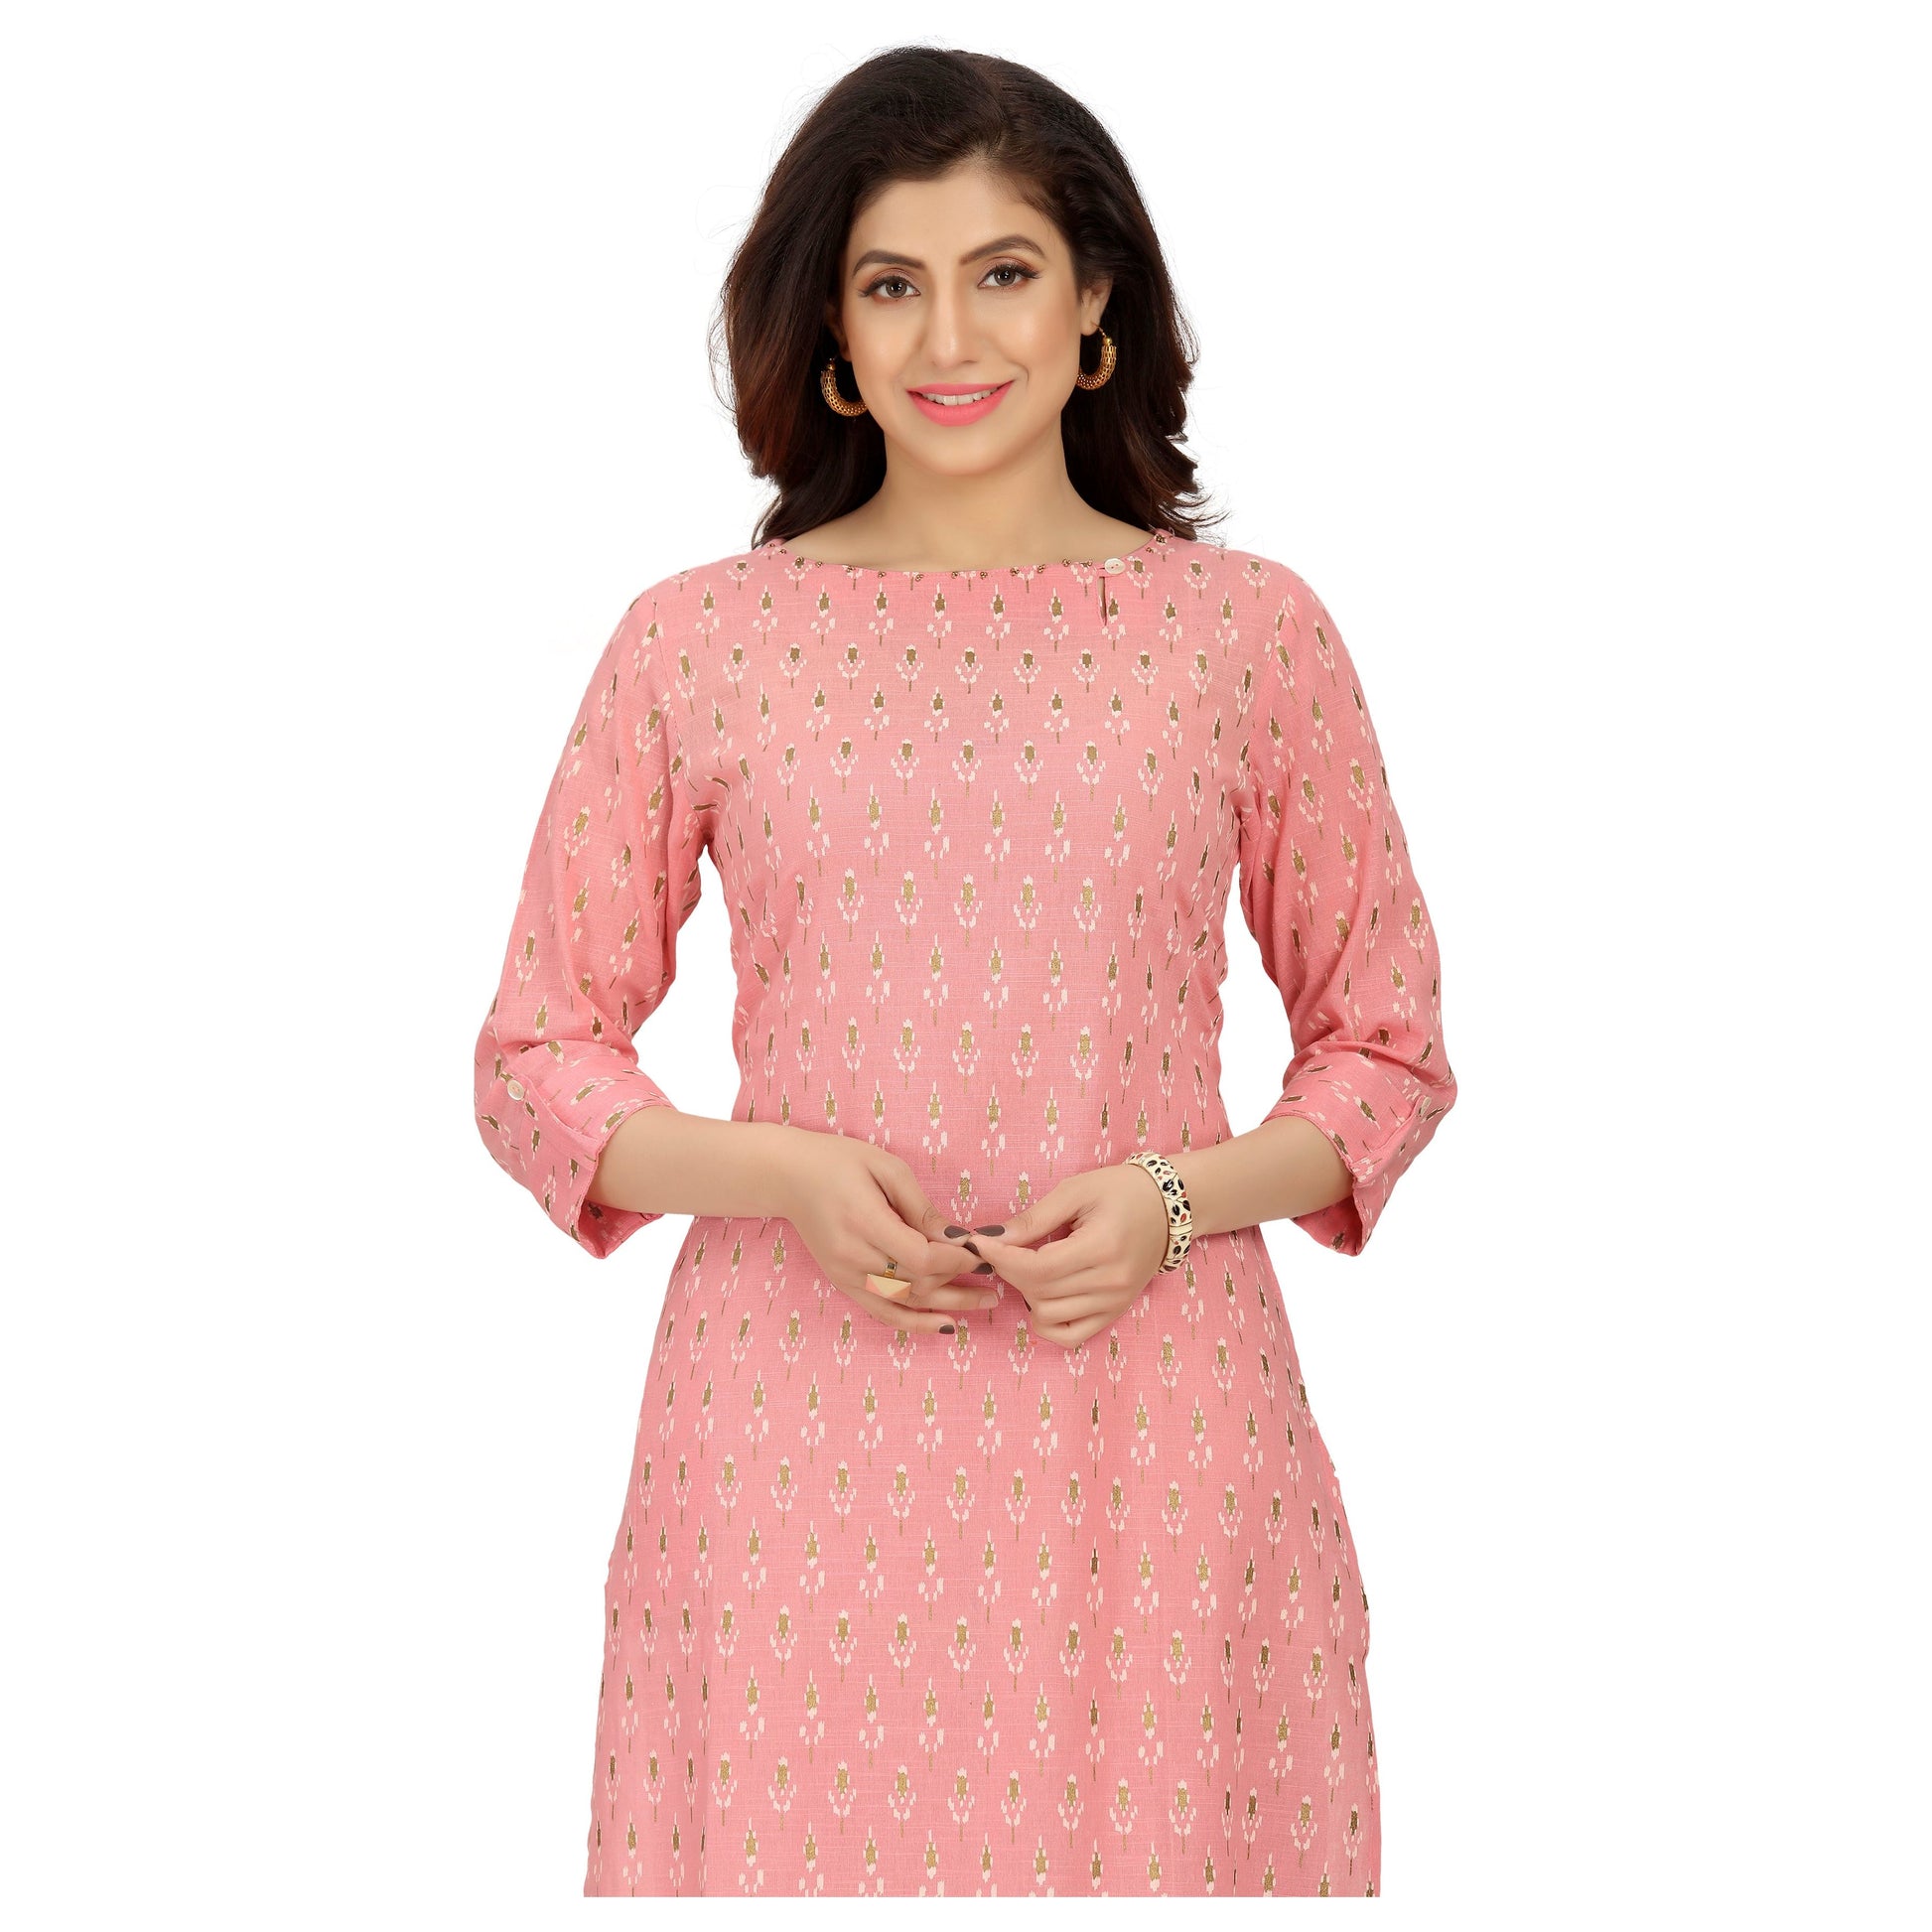 Pink kurta with pretty prints all over. 3/4th sleeves with gold details. Kurta is perfect for all occasions. 